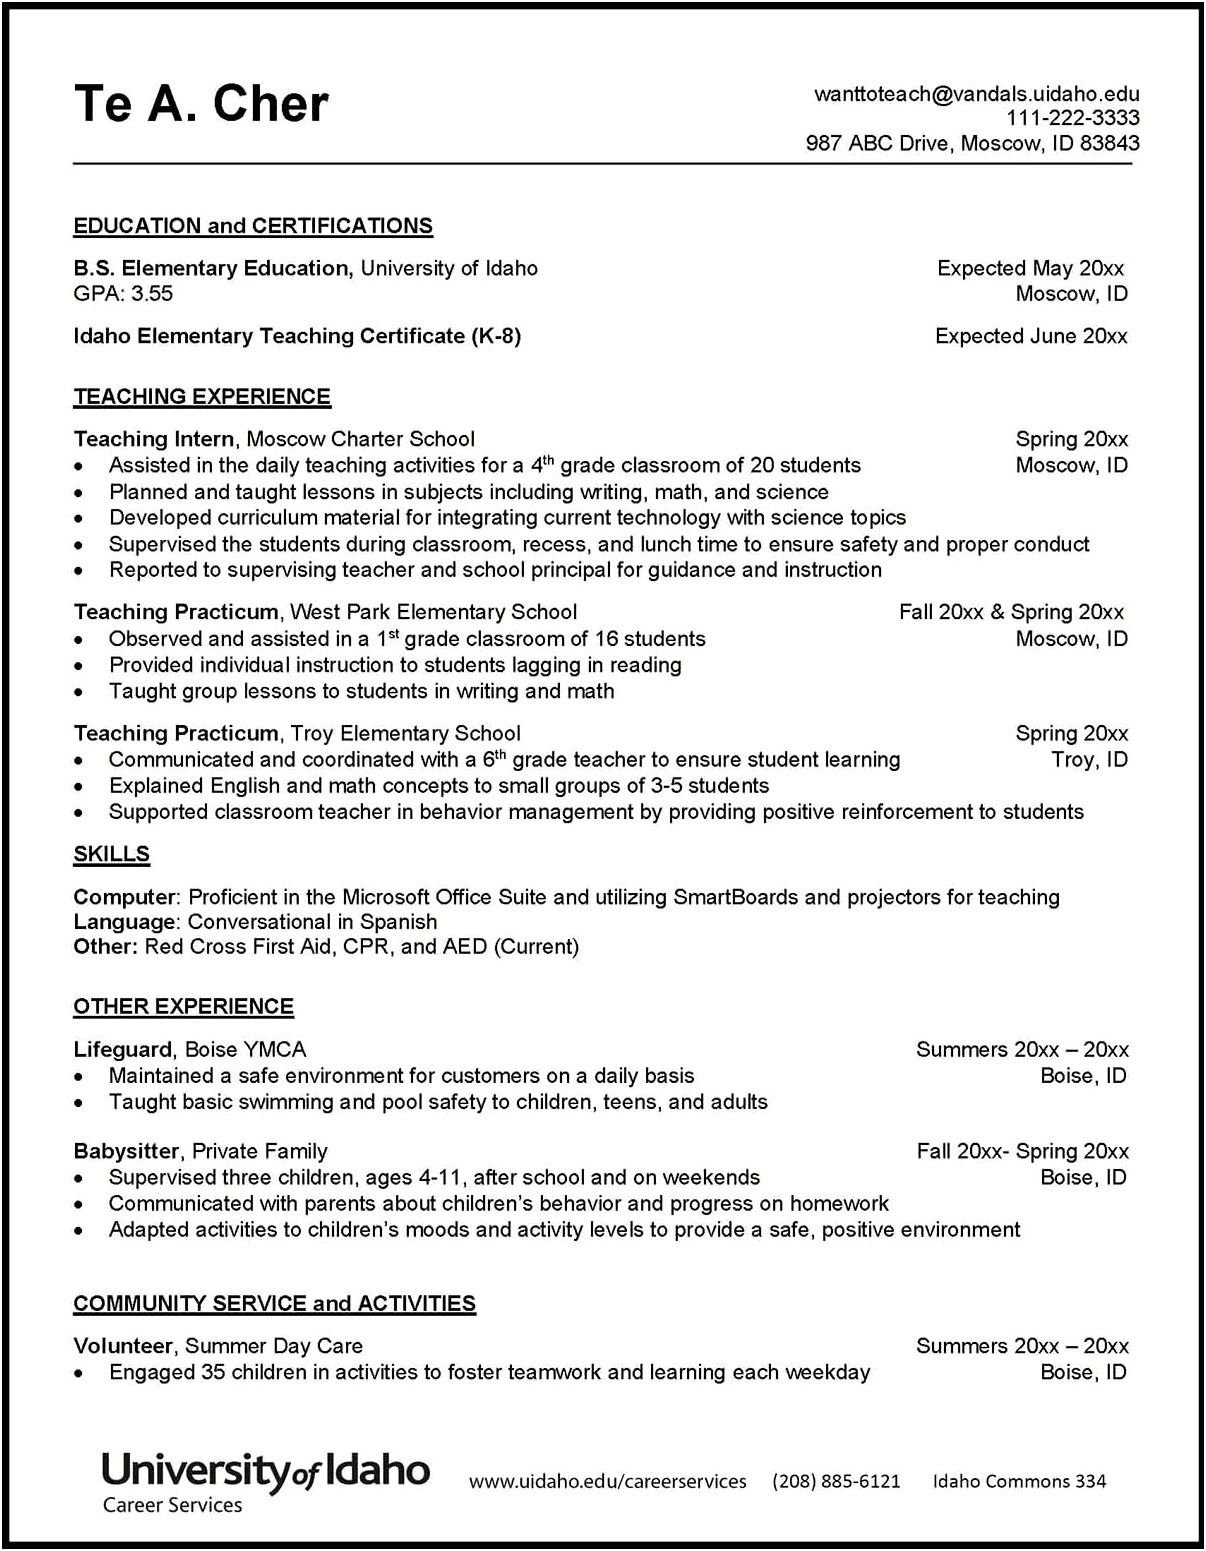 Professional Resume Objective Examples Environmental Science